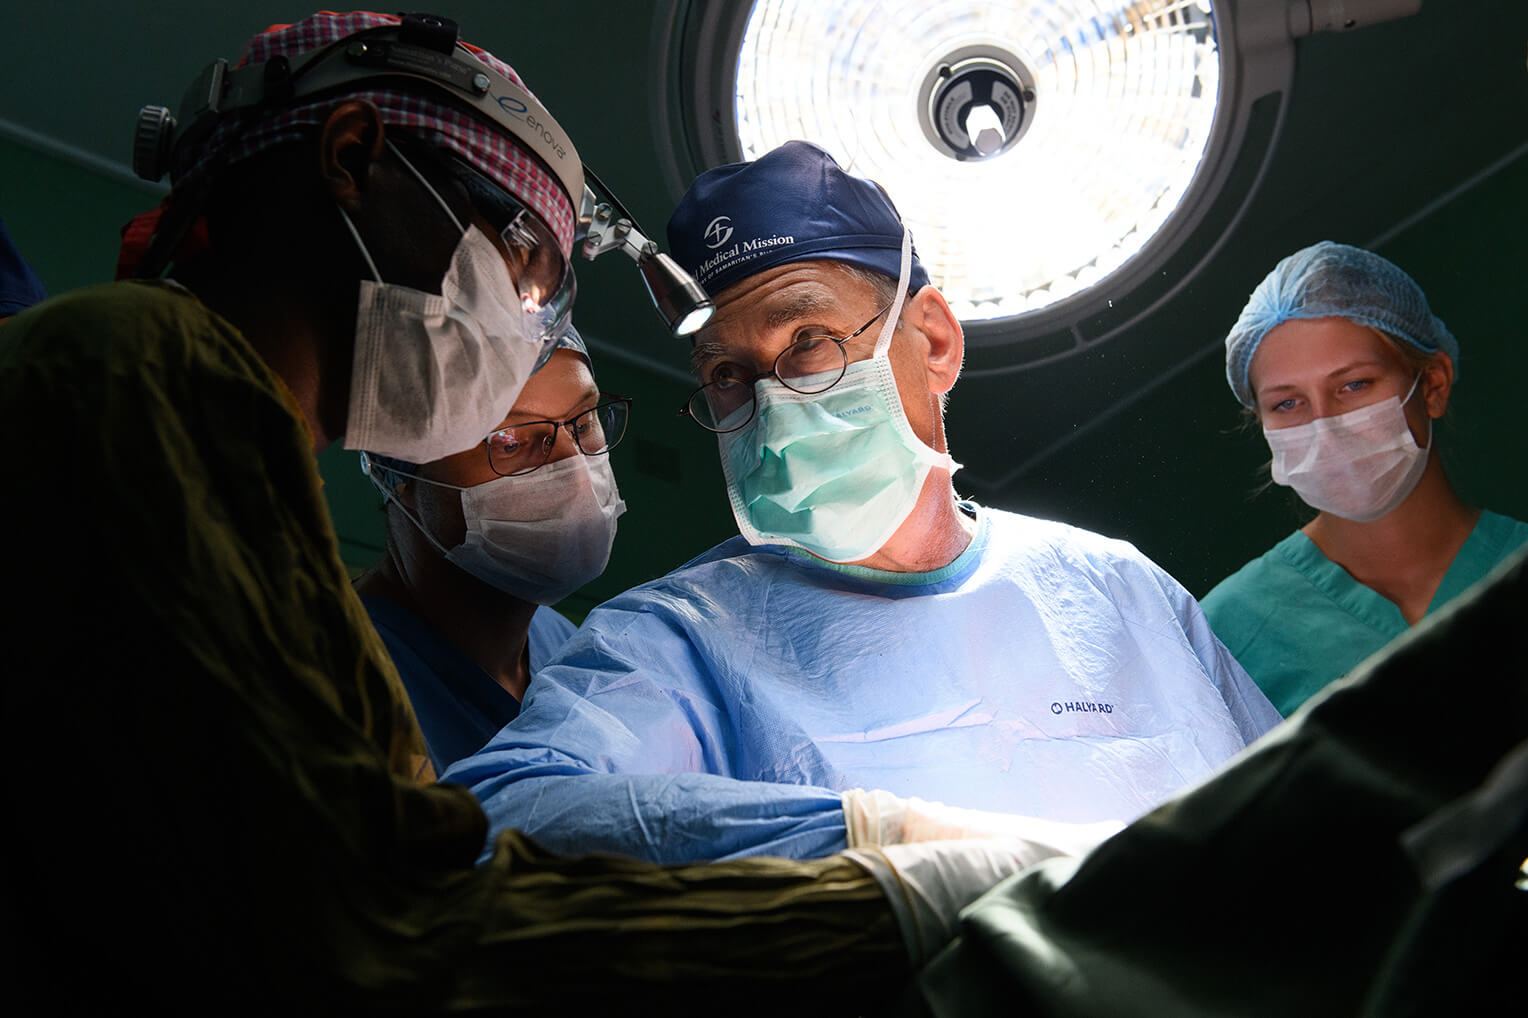 A Malawian resident surgeon participated in each surgery. Our doctors took the time to teach them along the way.